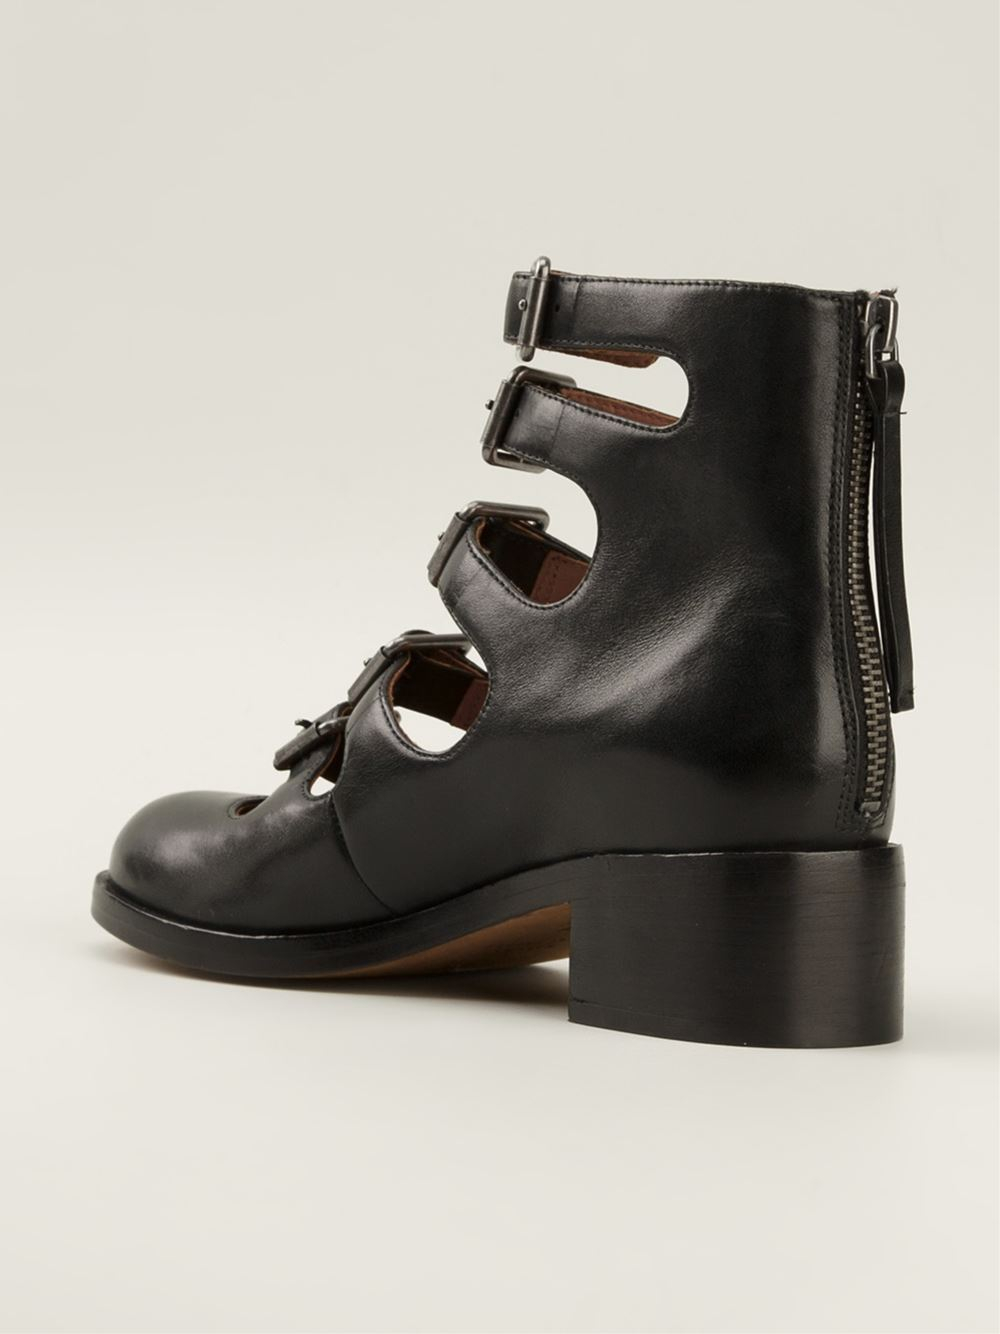 Marc By Marc Jacobs Multi Strap Boots in Black